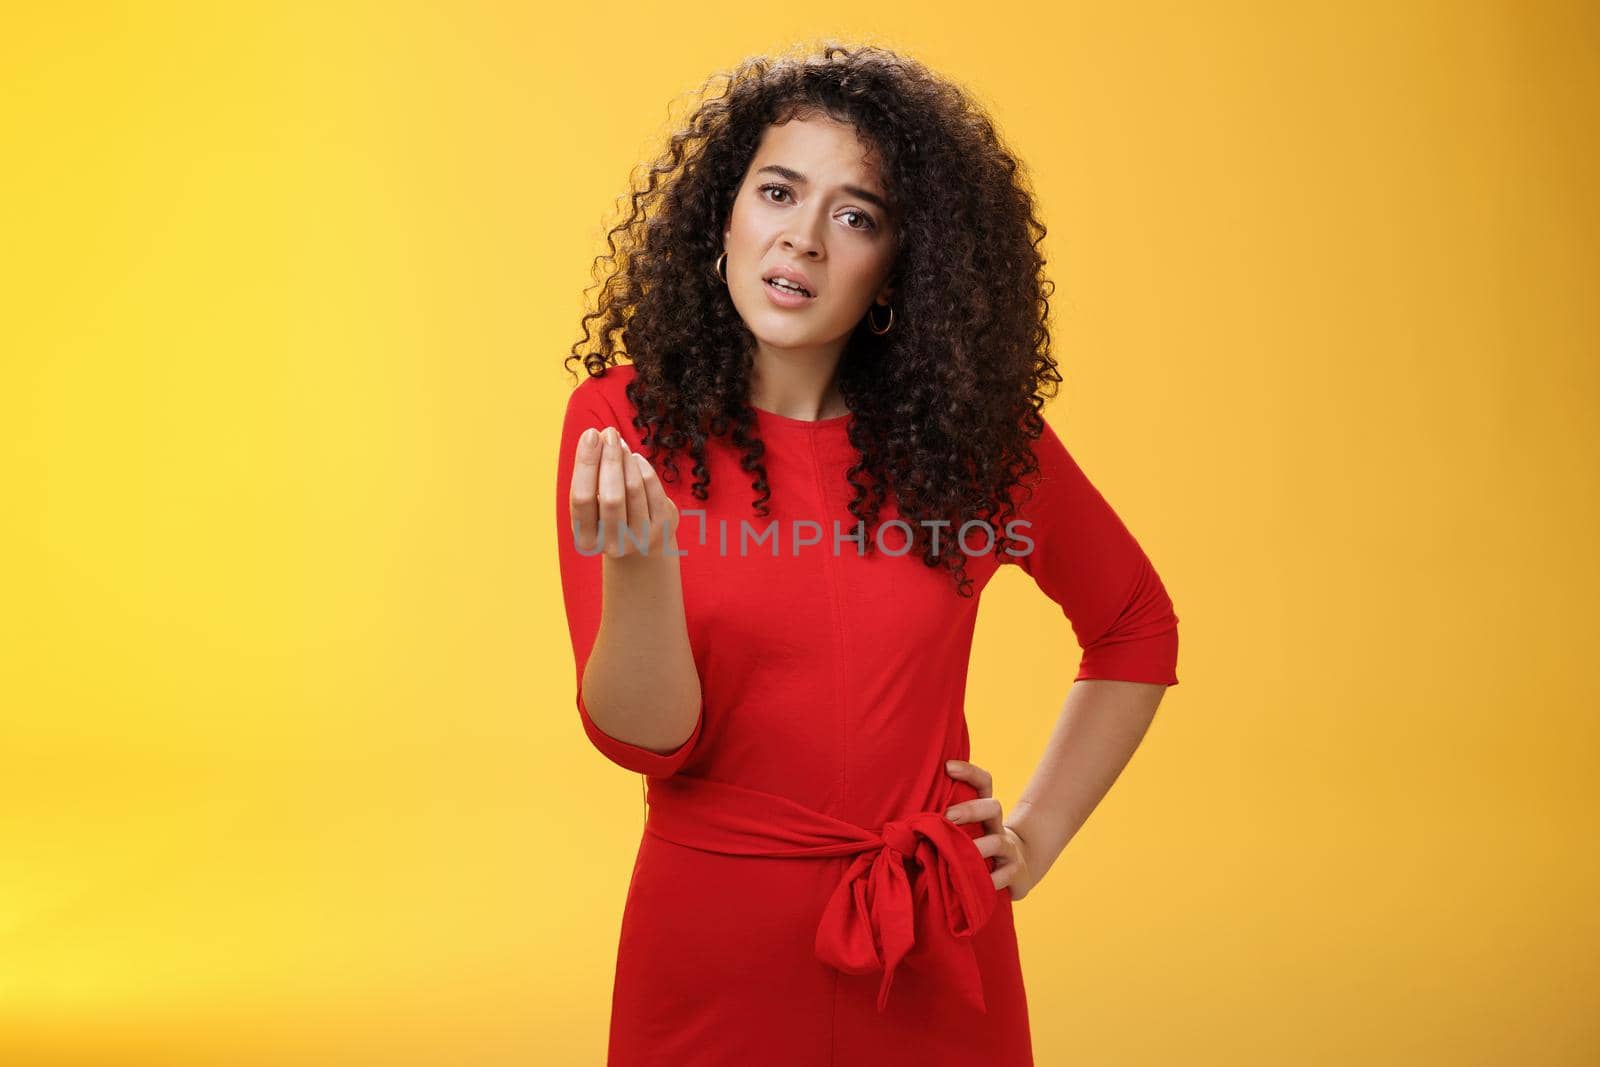 Girl being pissed off arguing ad complaining making italian what do you want gesture looking bothered waiting for explanation as standing annoyed and fed up over yellow background. Negative emotions concept